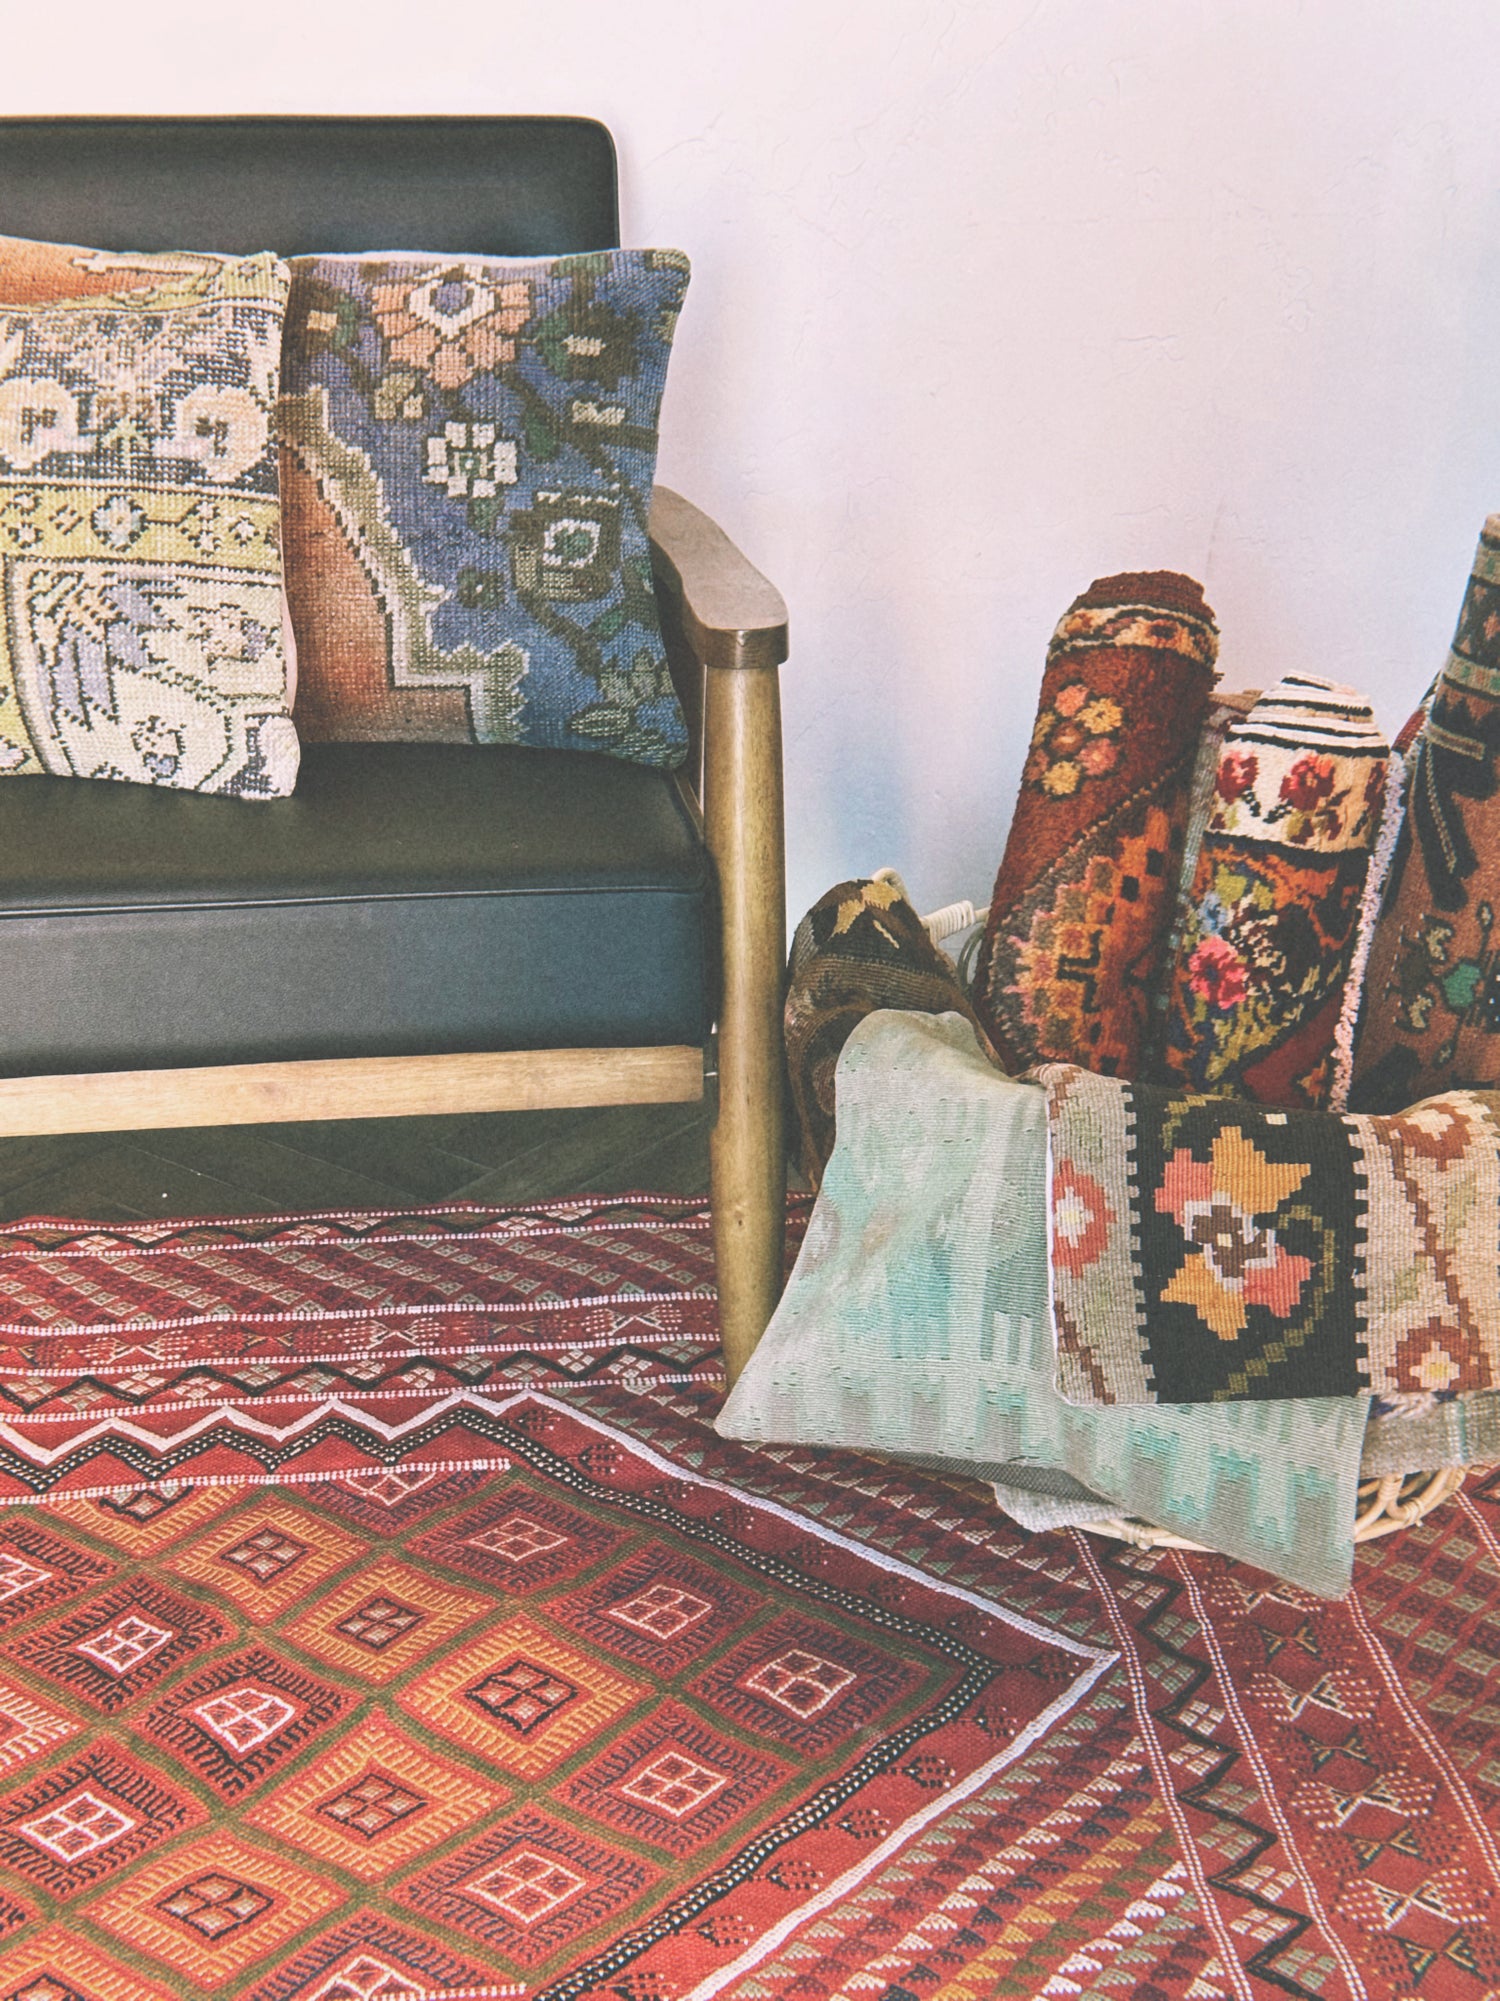 assortment of colorful turkish rugs and pillows featuring geometric and floral embroidered designs